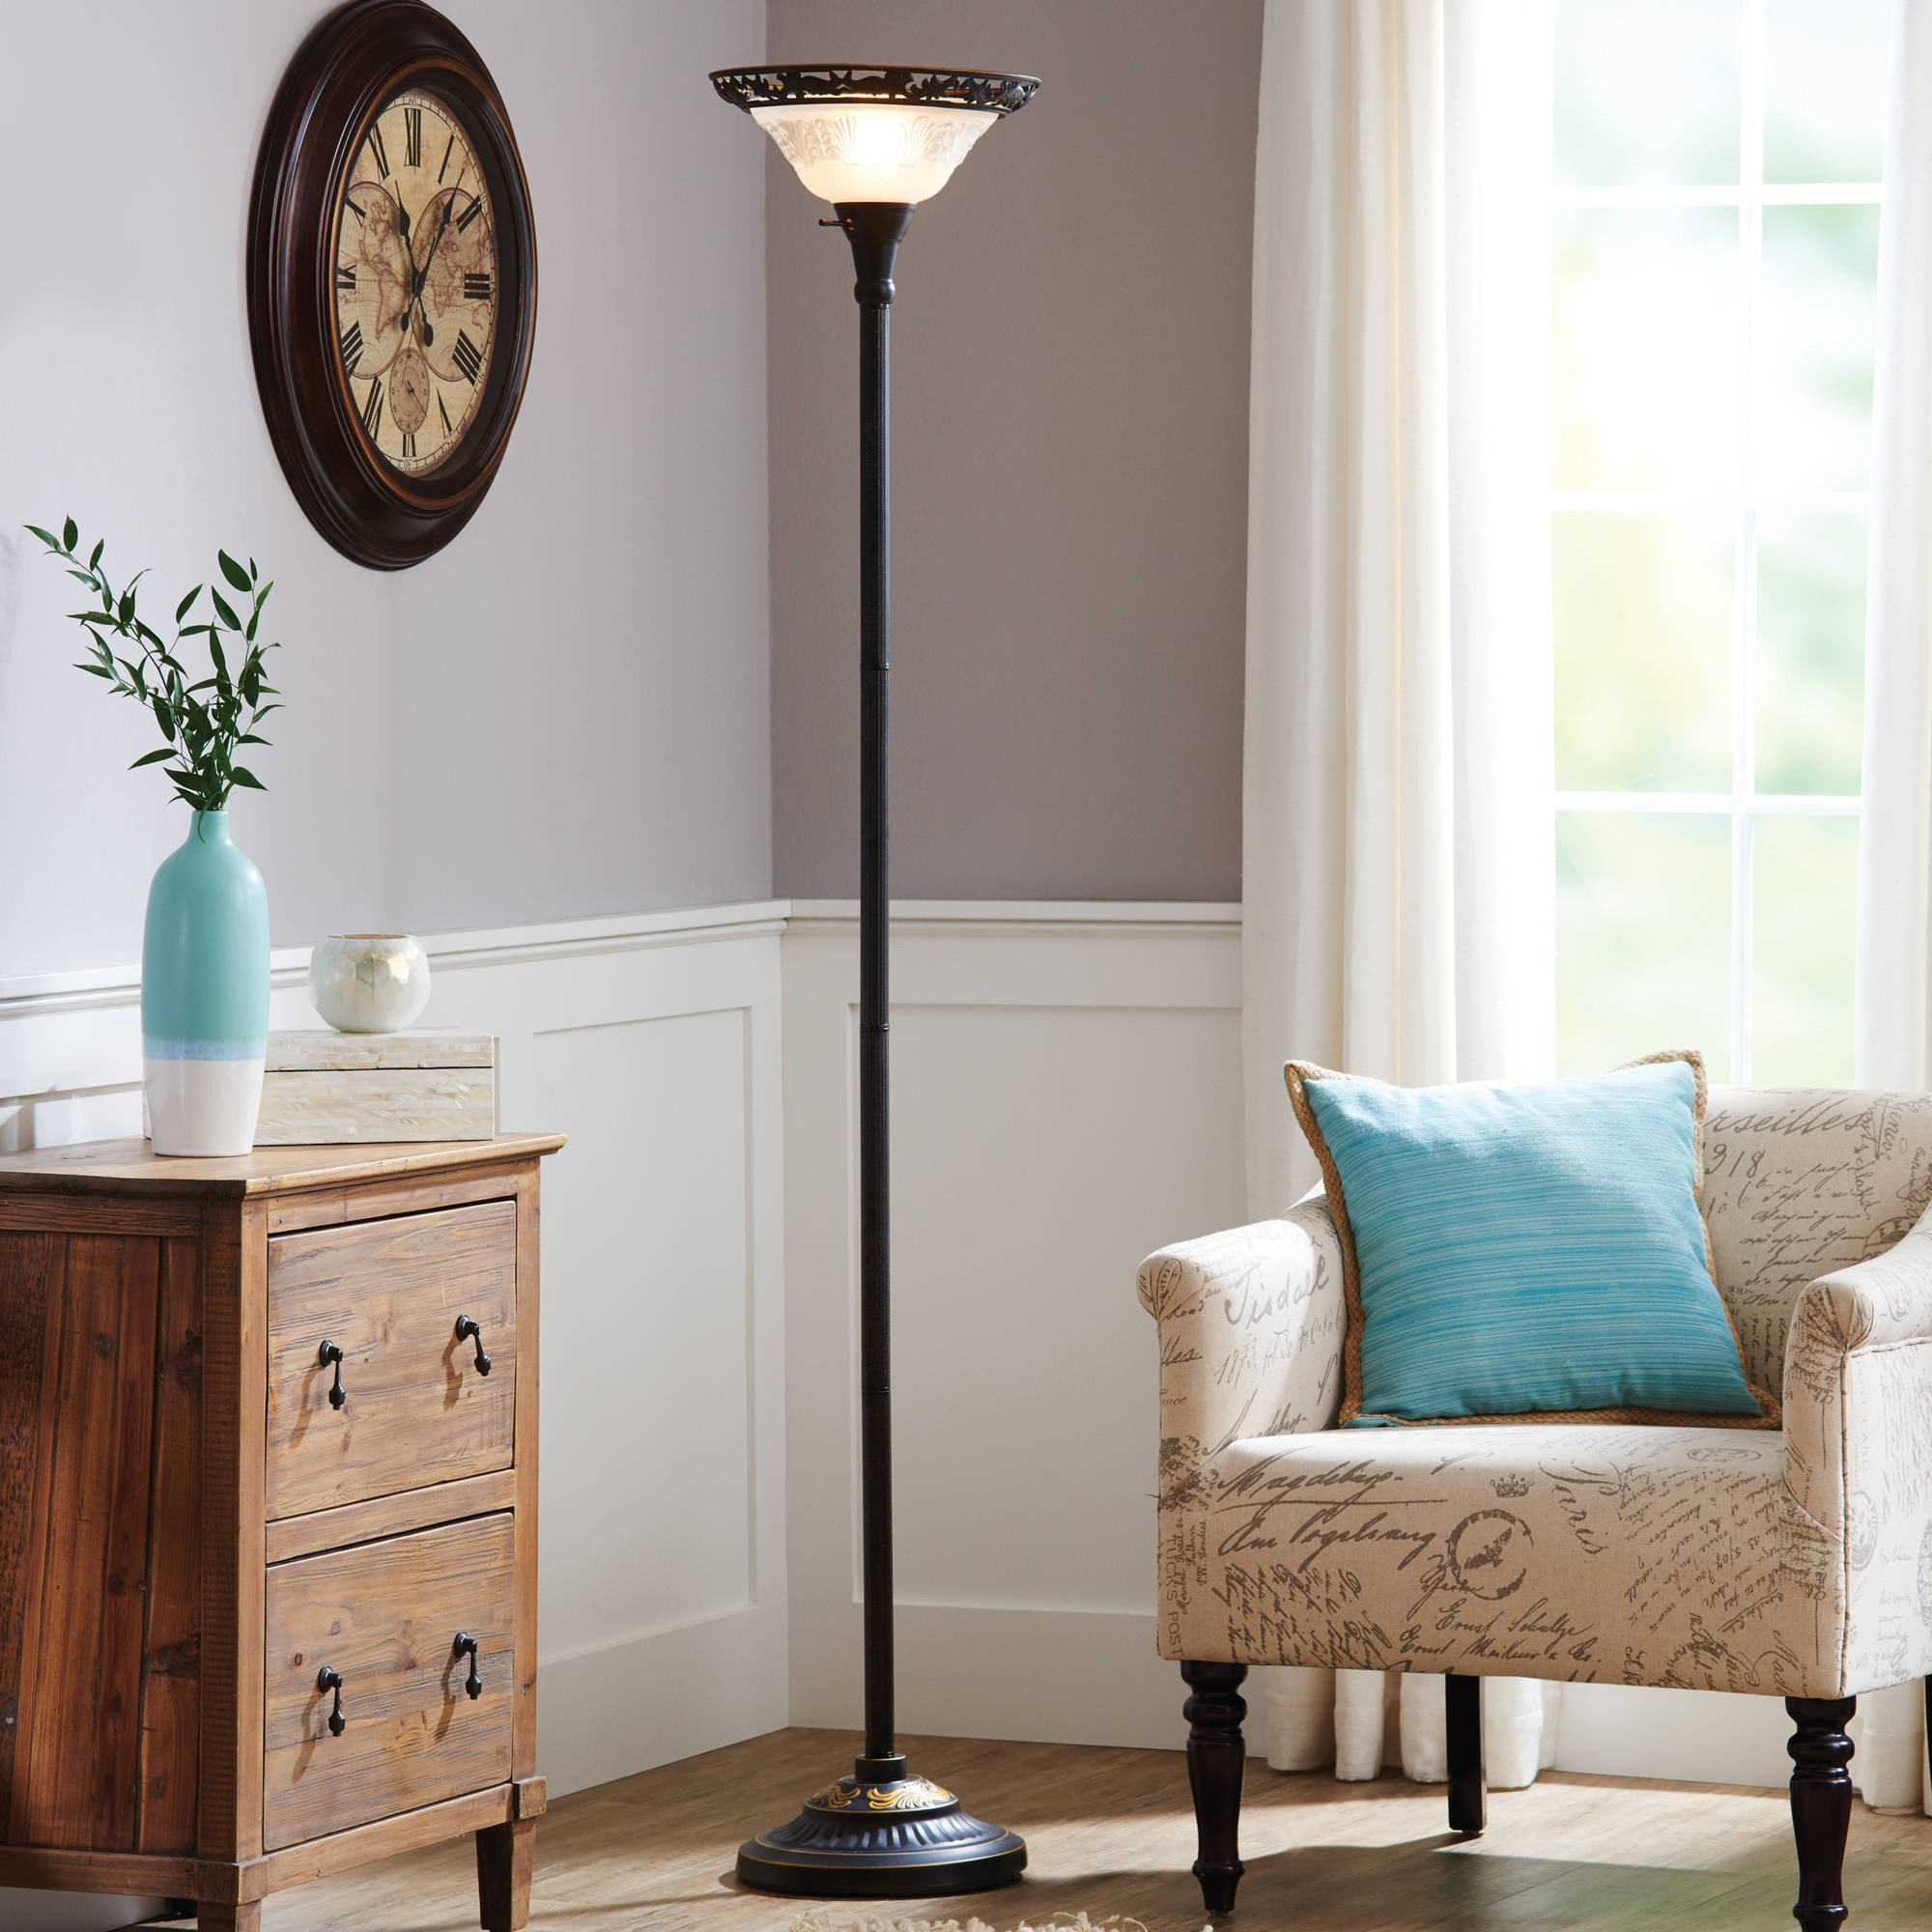 Living Room Lamps Walmart
 15 Ideas of Fancy Living Room Table Lamps